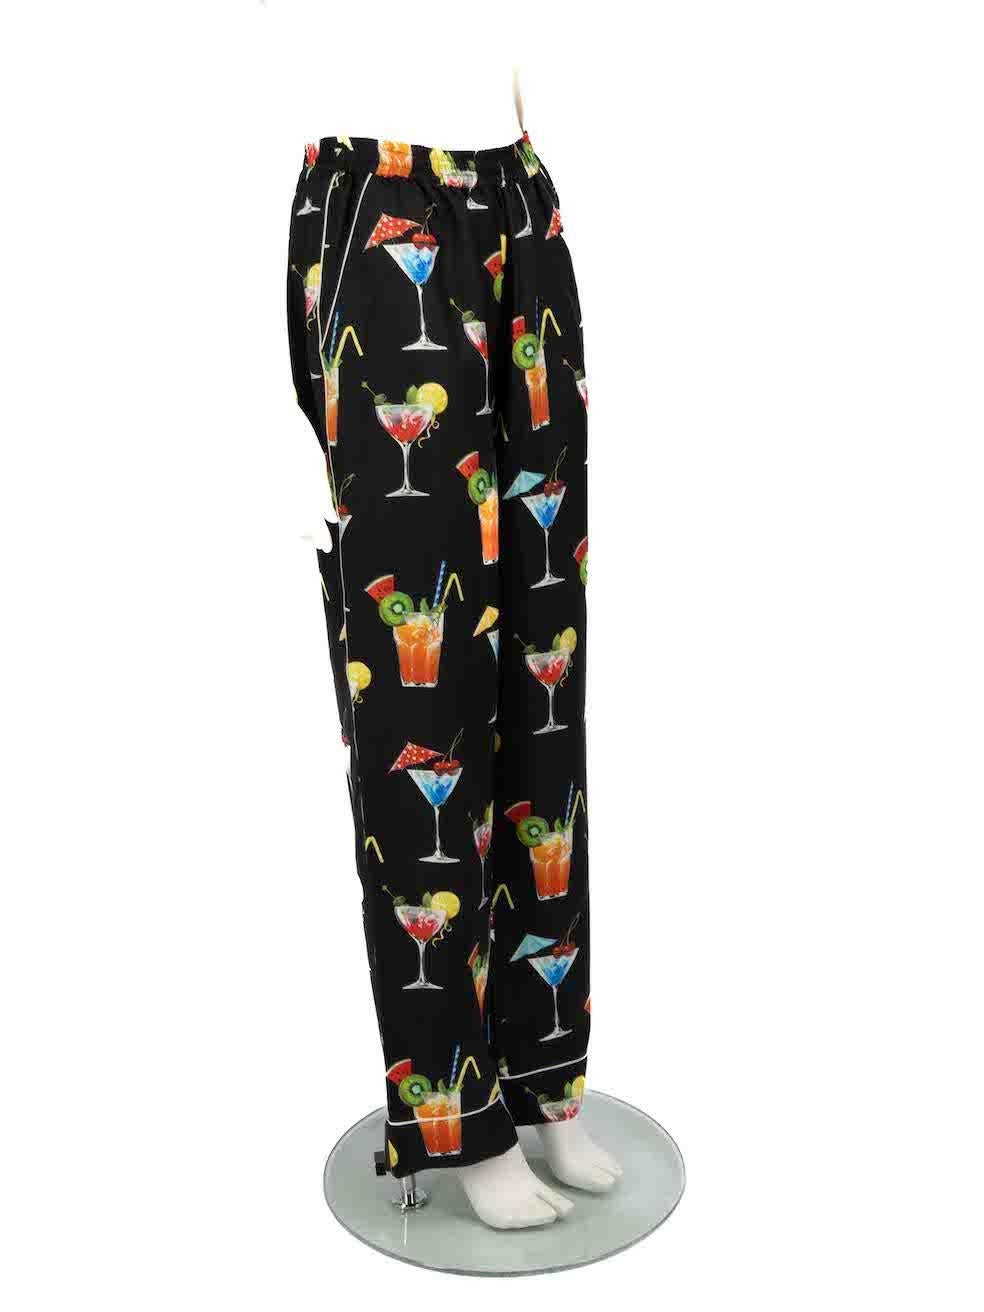 CONDITION is Never worn. No visible wear to trousers is evident on this new Dolce & Gabbana designer resale item.
 
 
 
 Details
 
 
 Multicolour- black tone
 
 Silk
 
 Pyjama trousers
 
 Cocktail print
 
 Elasticated waistband
 
 Straight leg
 
 2x